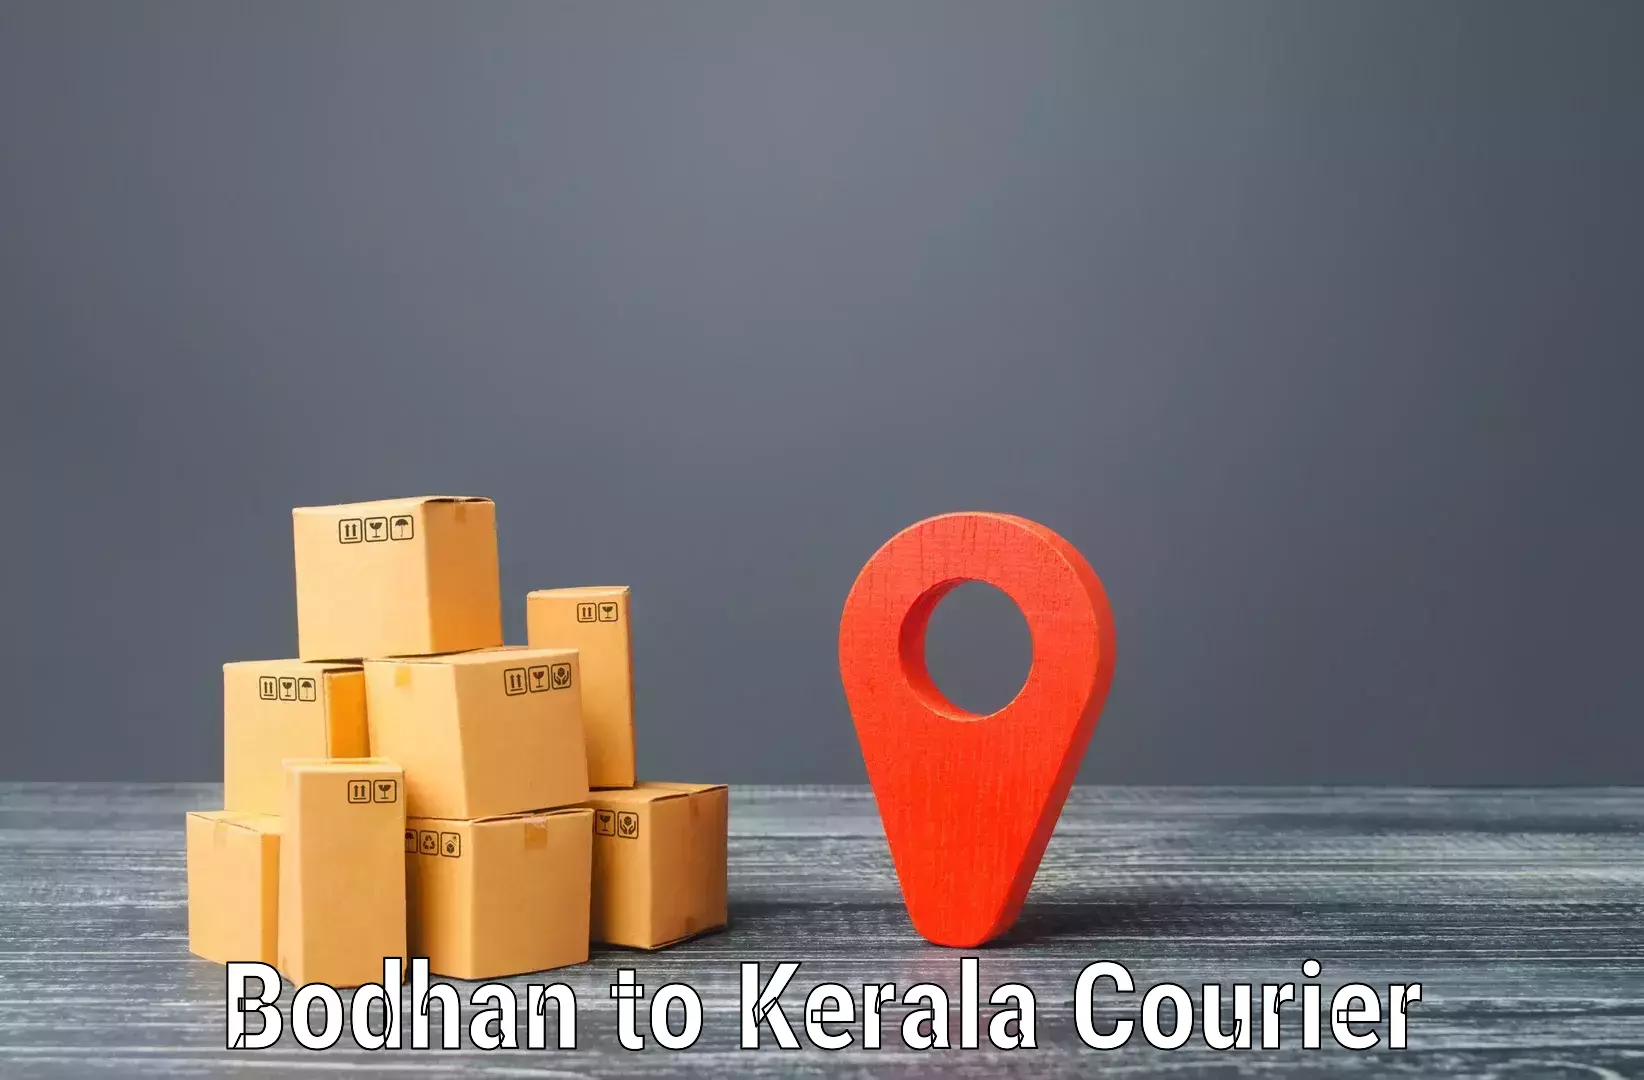 Quality courier services Bodhan to Cochin University of Science and Technology